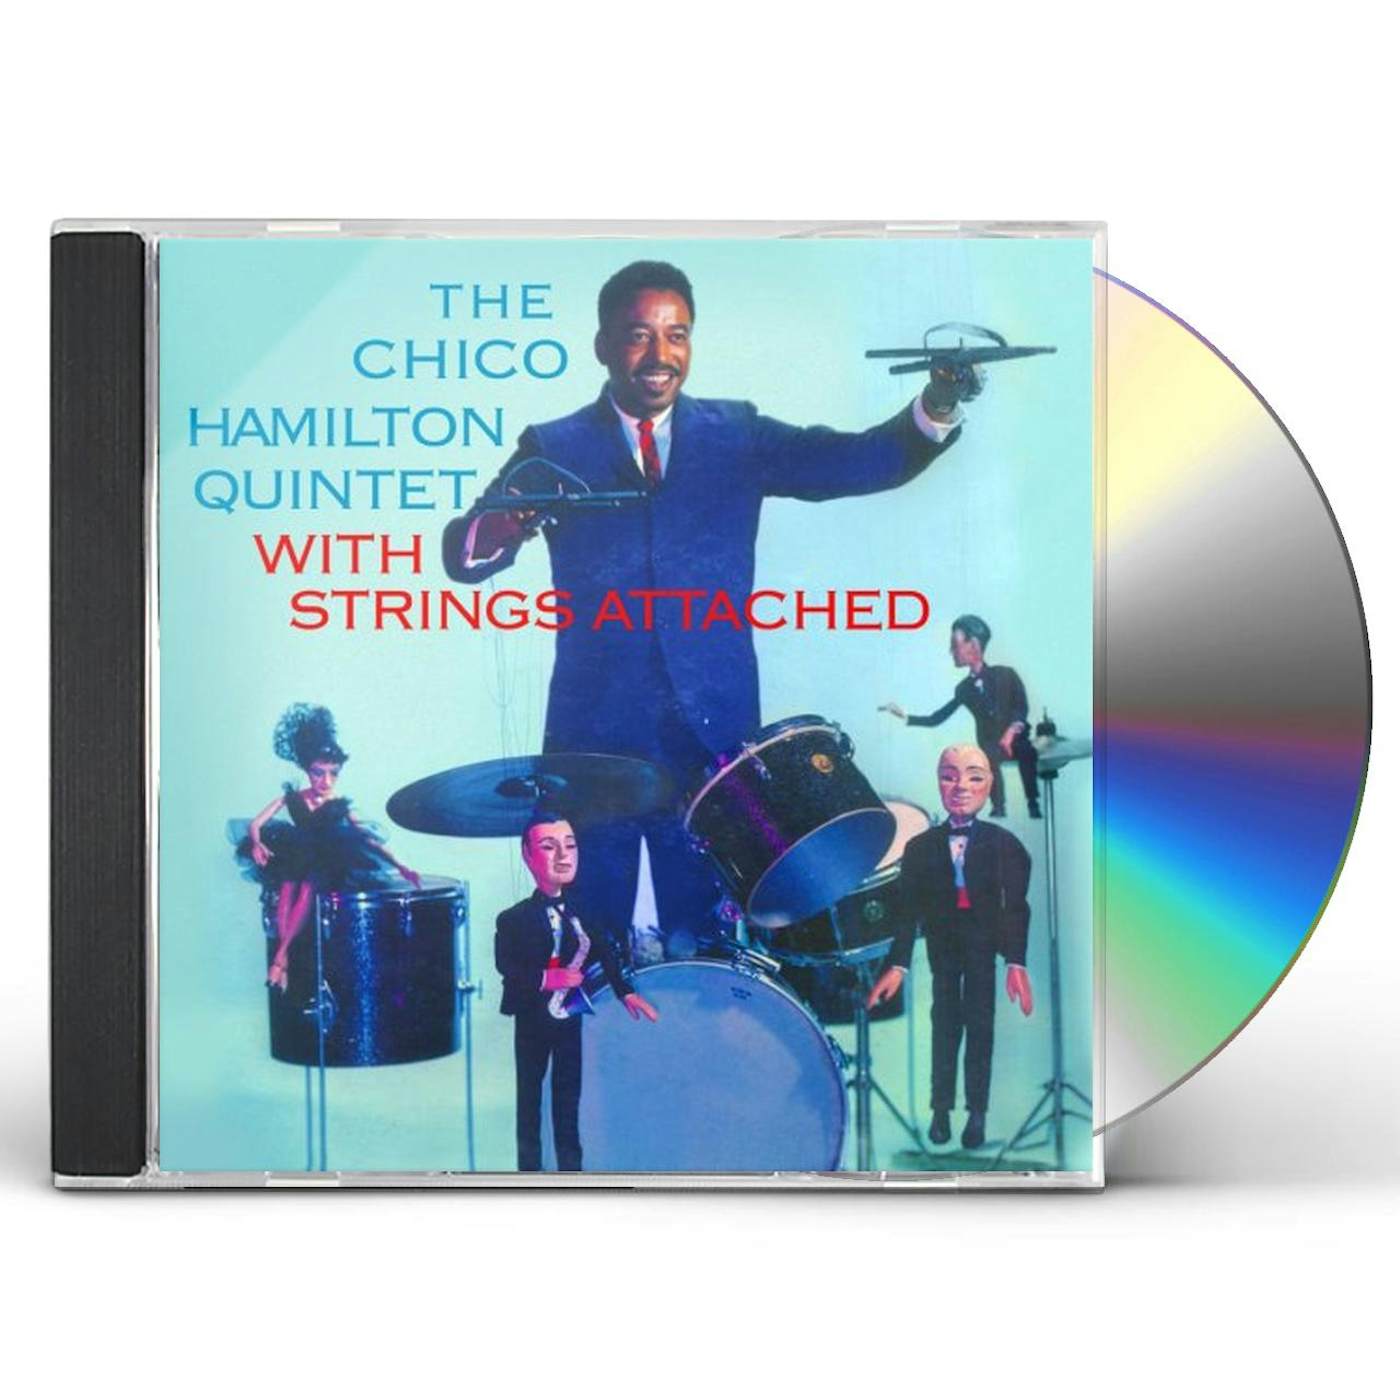 CHICO HAMILTON QUINTET WITH STRINGS ATTACHED CD